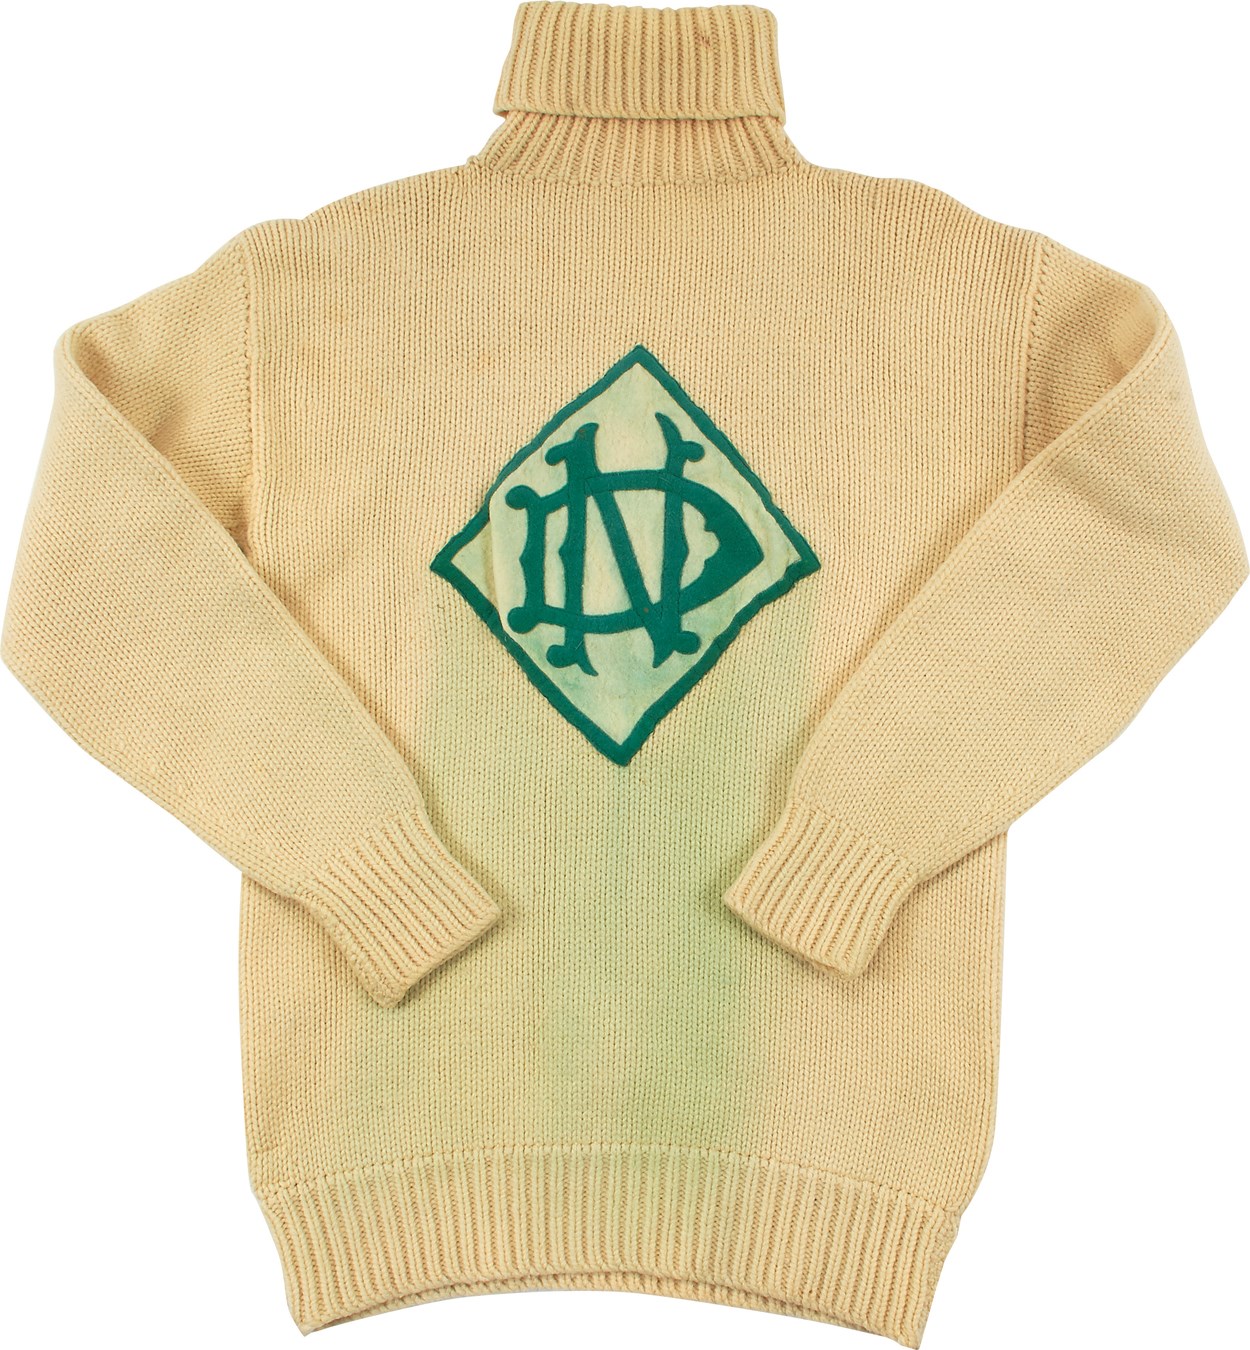 Early Notre Dame Football Letterman's Sweater